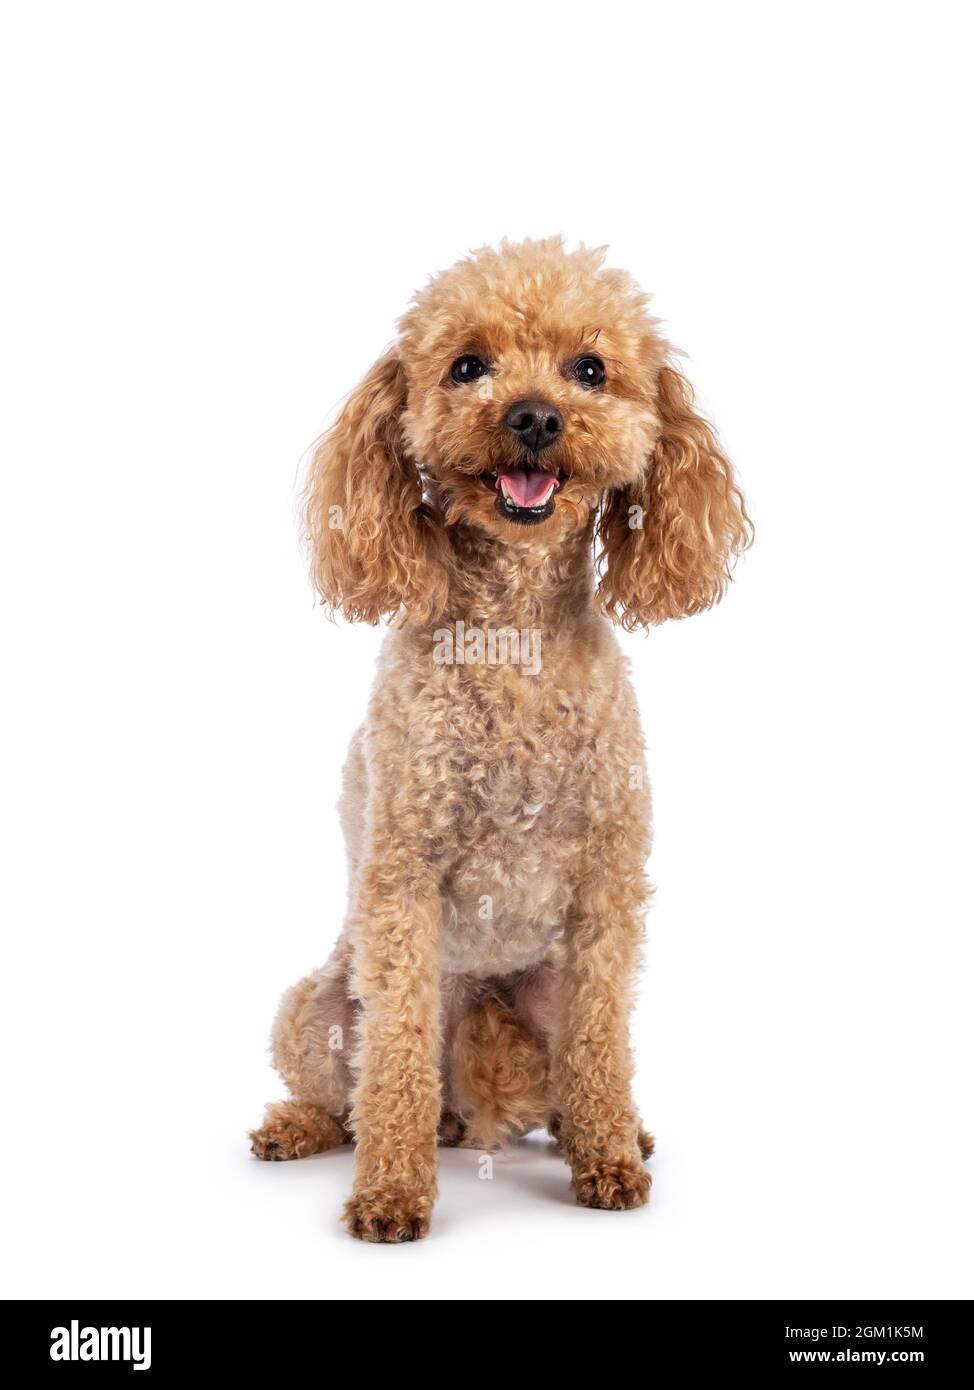 Adorable young adult apricot brown toy or miniature poodle. Recently groomed. Sitting  facing camera with mouth open showing tongue. Isolated on a whi Stock Photo